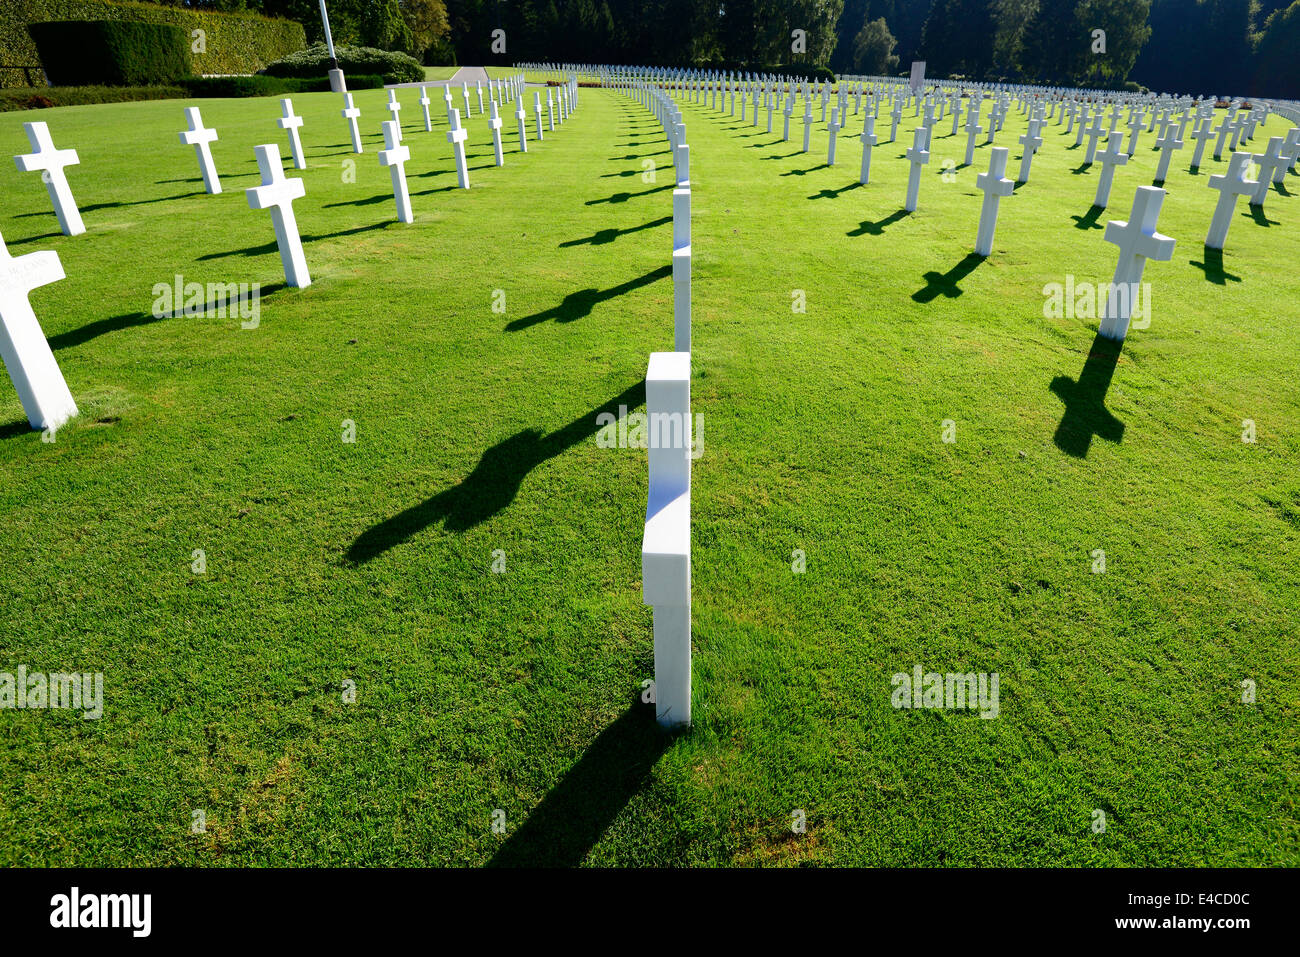 White Cross Markers Luxembourg American Cemetery and Memorial Europe world war ii Stock Photo